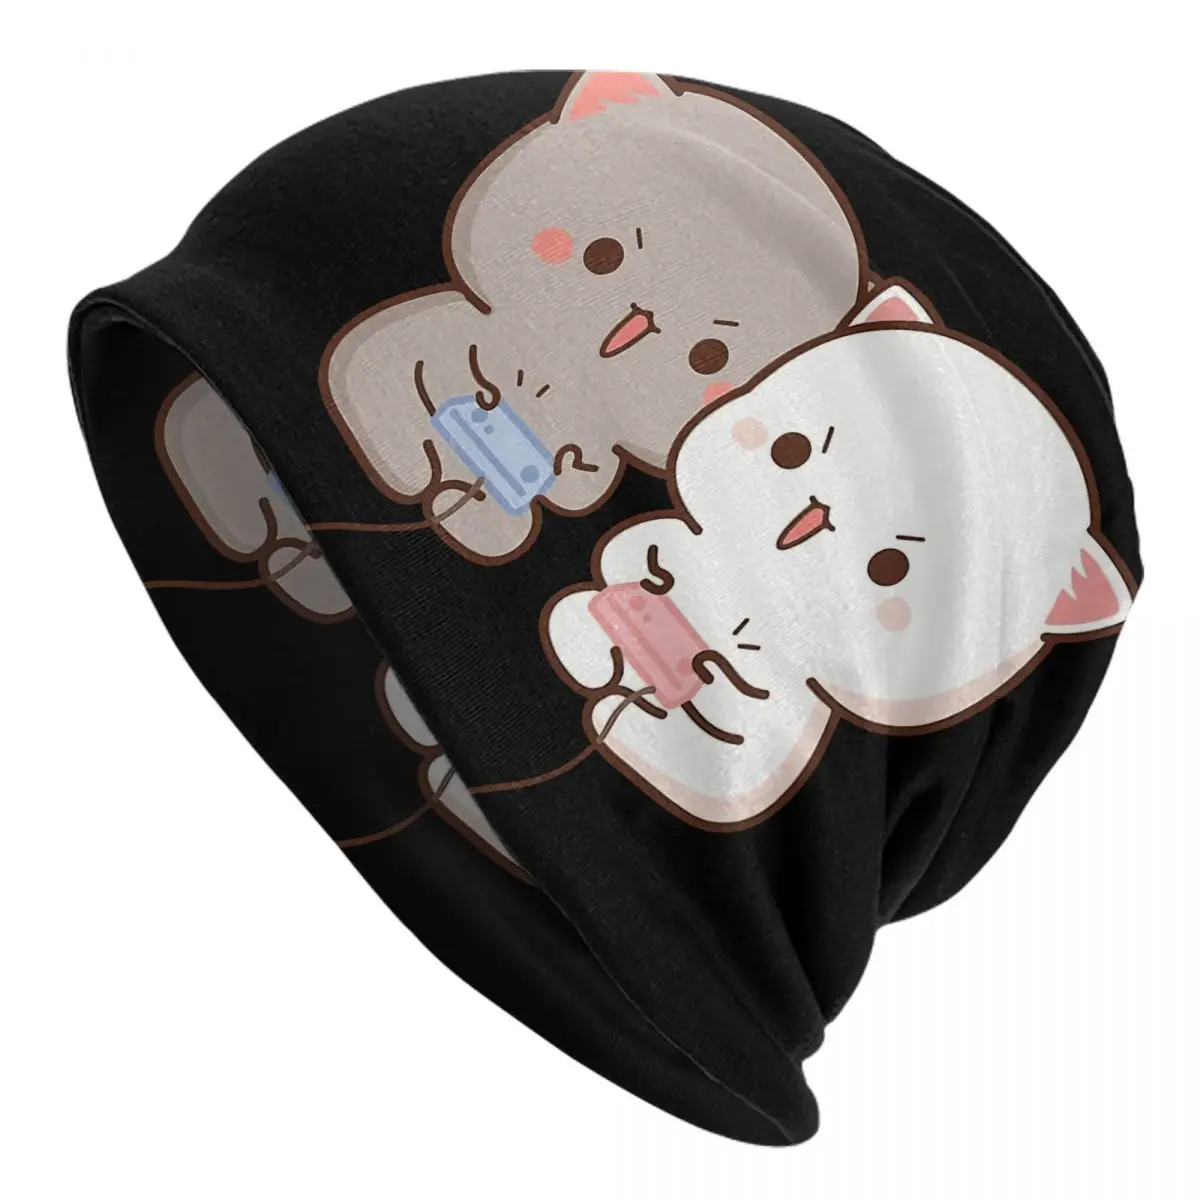 Peach And Goma Mochi Cat Gaming Caps Men Women Unisex Streetwear Winter Warm Knit Hat Adult funny Hats